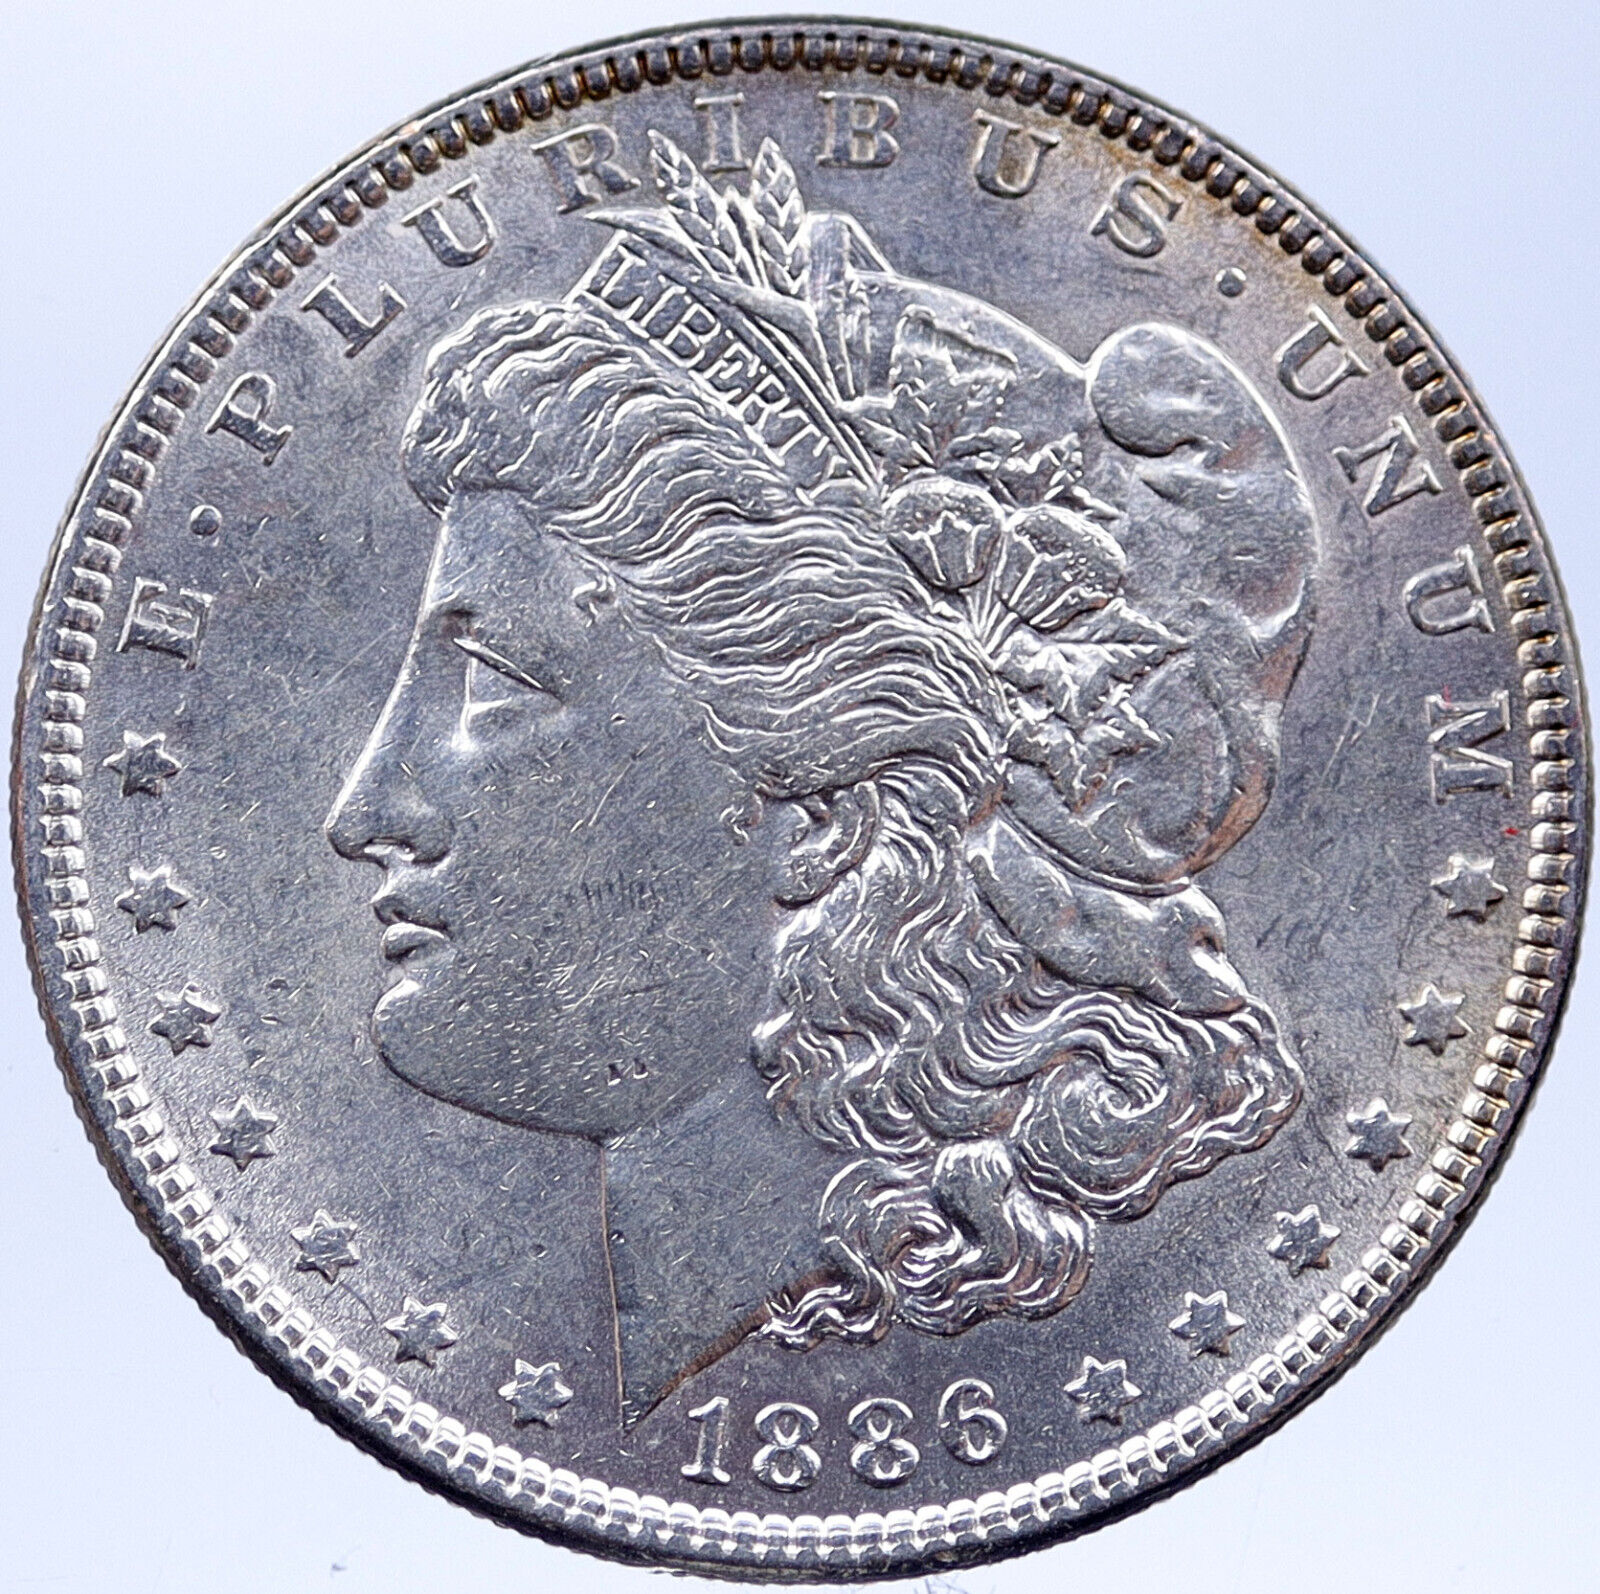 1886 P UNITED STATES of AMERICA US Eagle OLD Silver Morgan Dollar Coin i119352